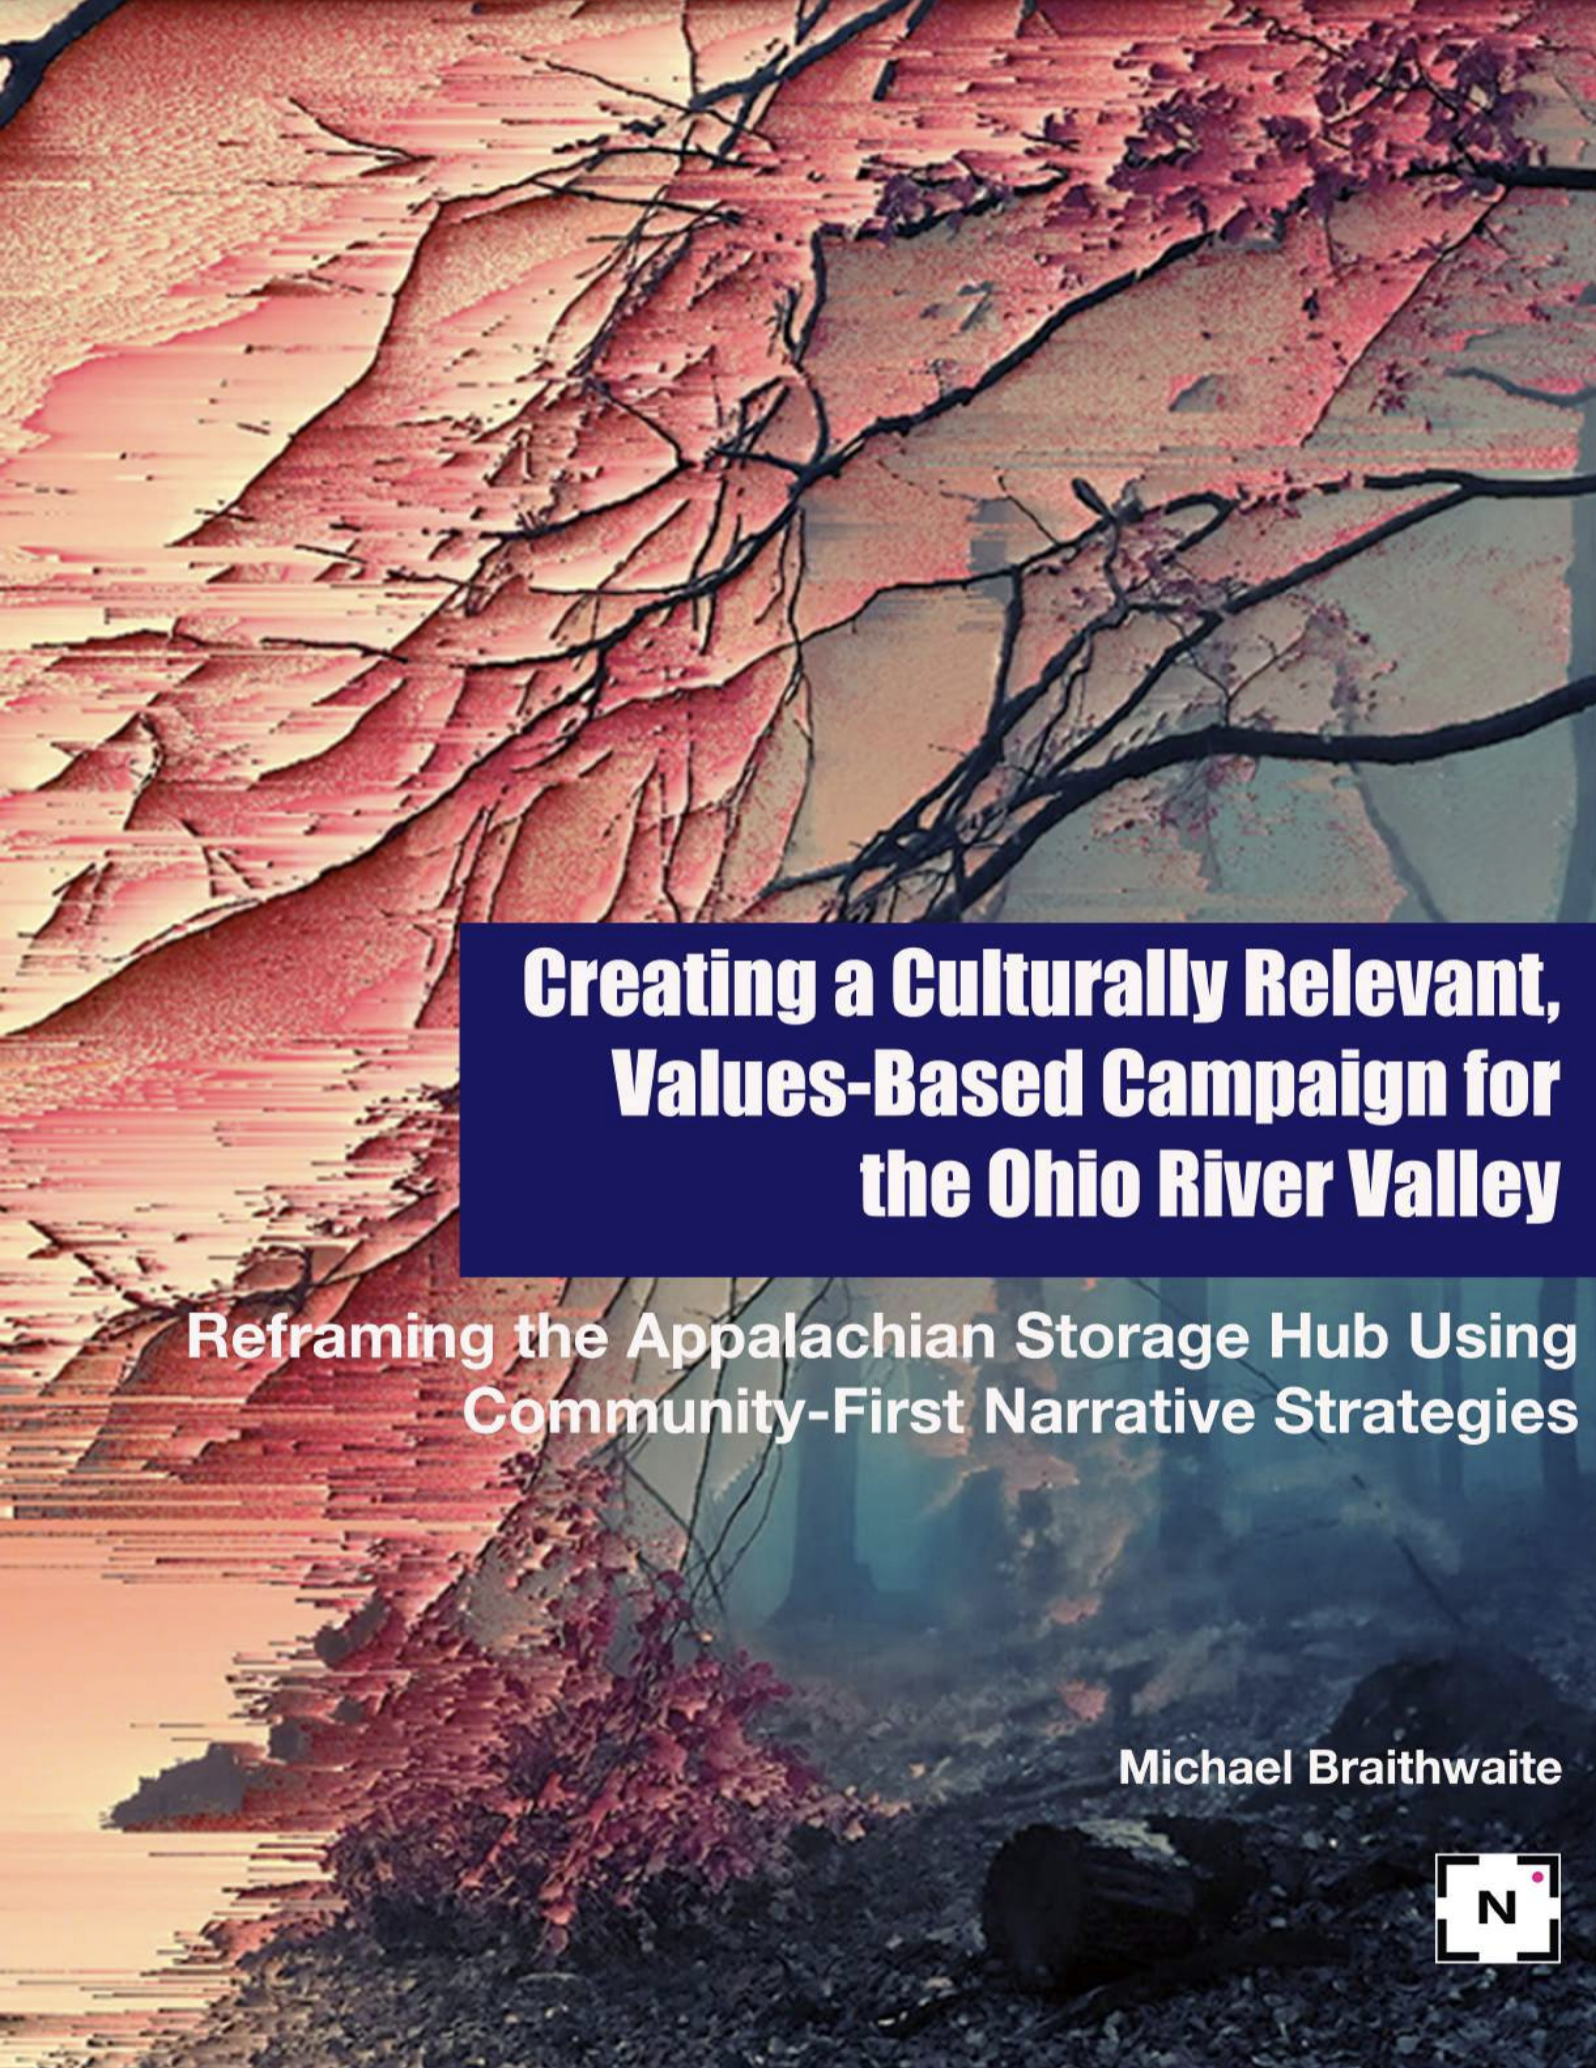 Creating a Culturally Relevant Campaign for the Ohio River Valley